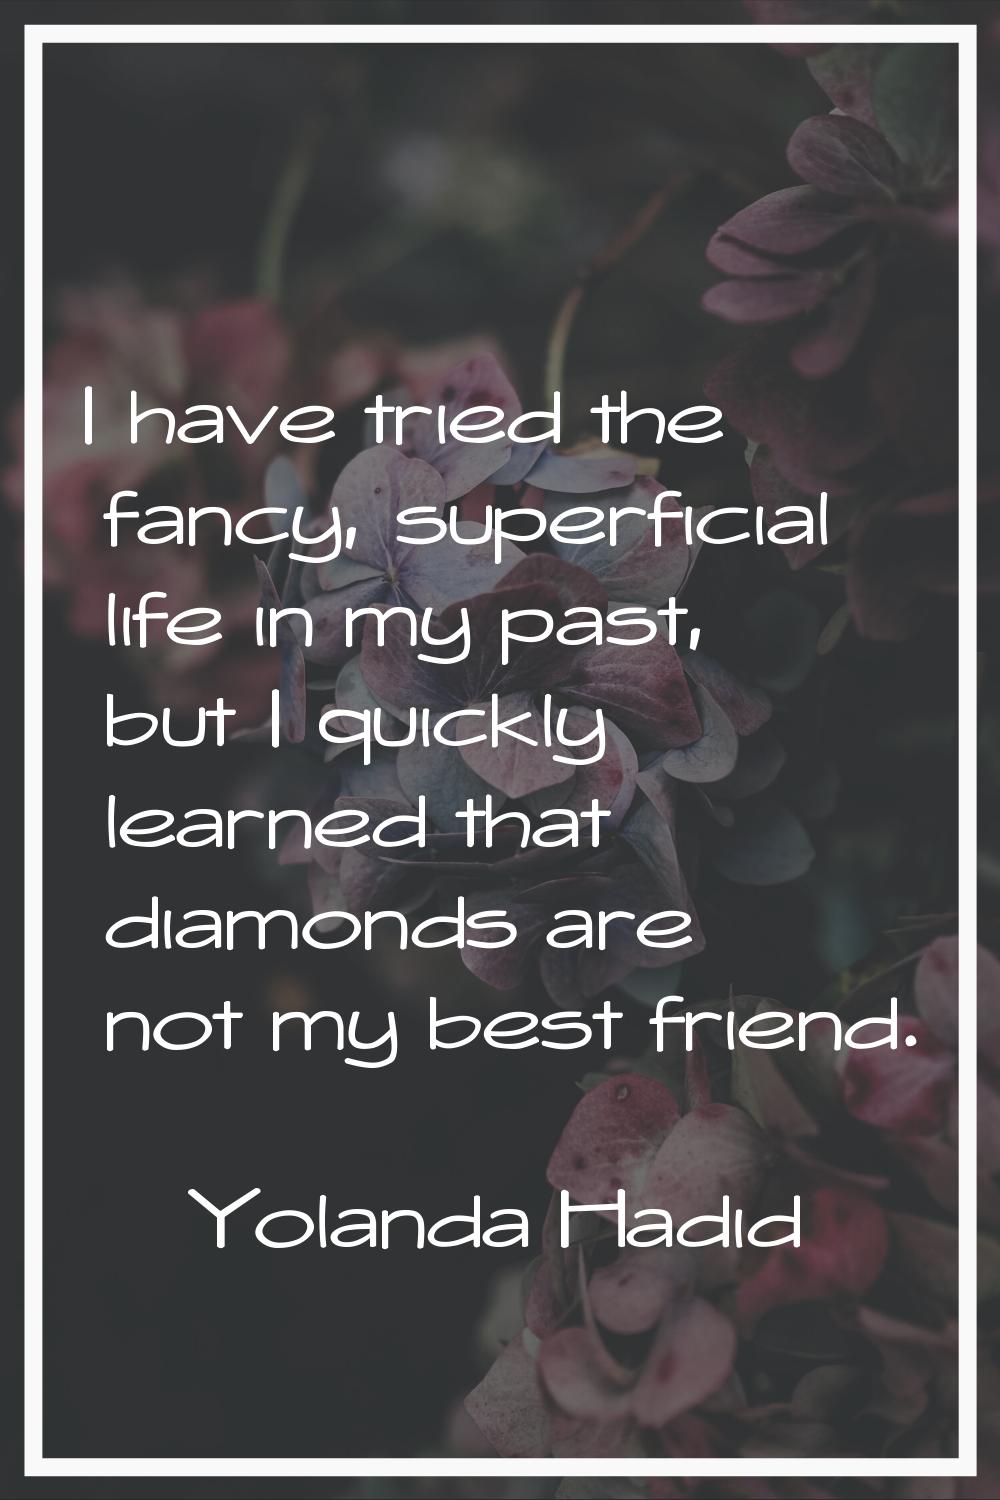 I have tried the fancy, superficial life in my past, but I quickly learned that diamonds are not my